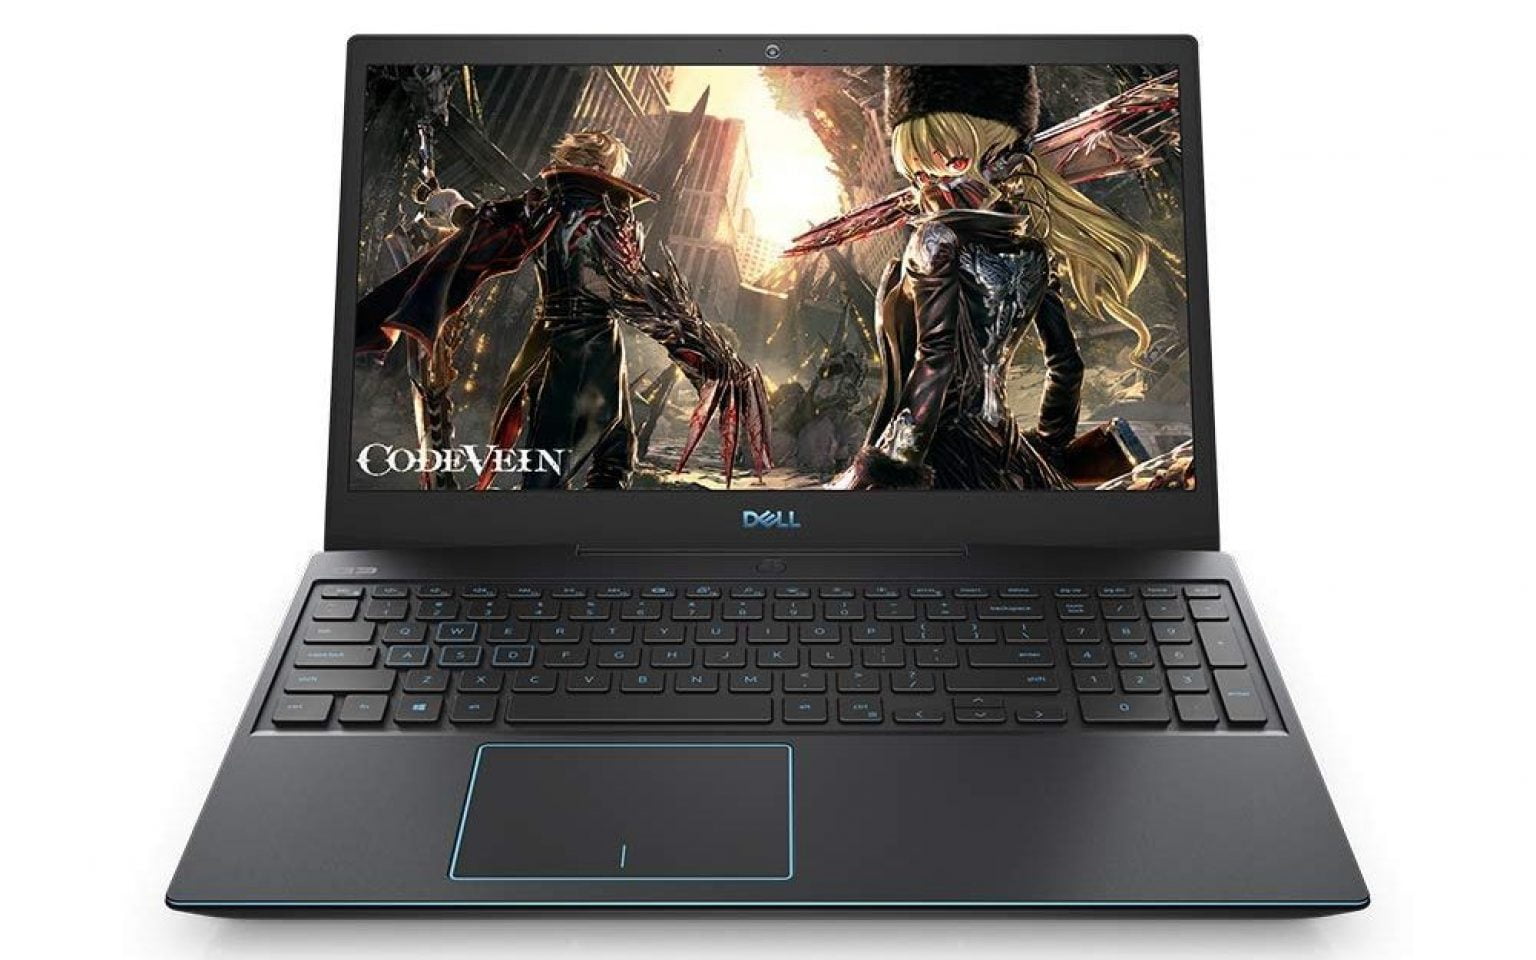 [TOP 10] Best Gaming Laptops Under 80000 (1660ti, i7, SSD)